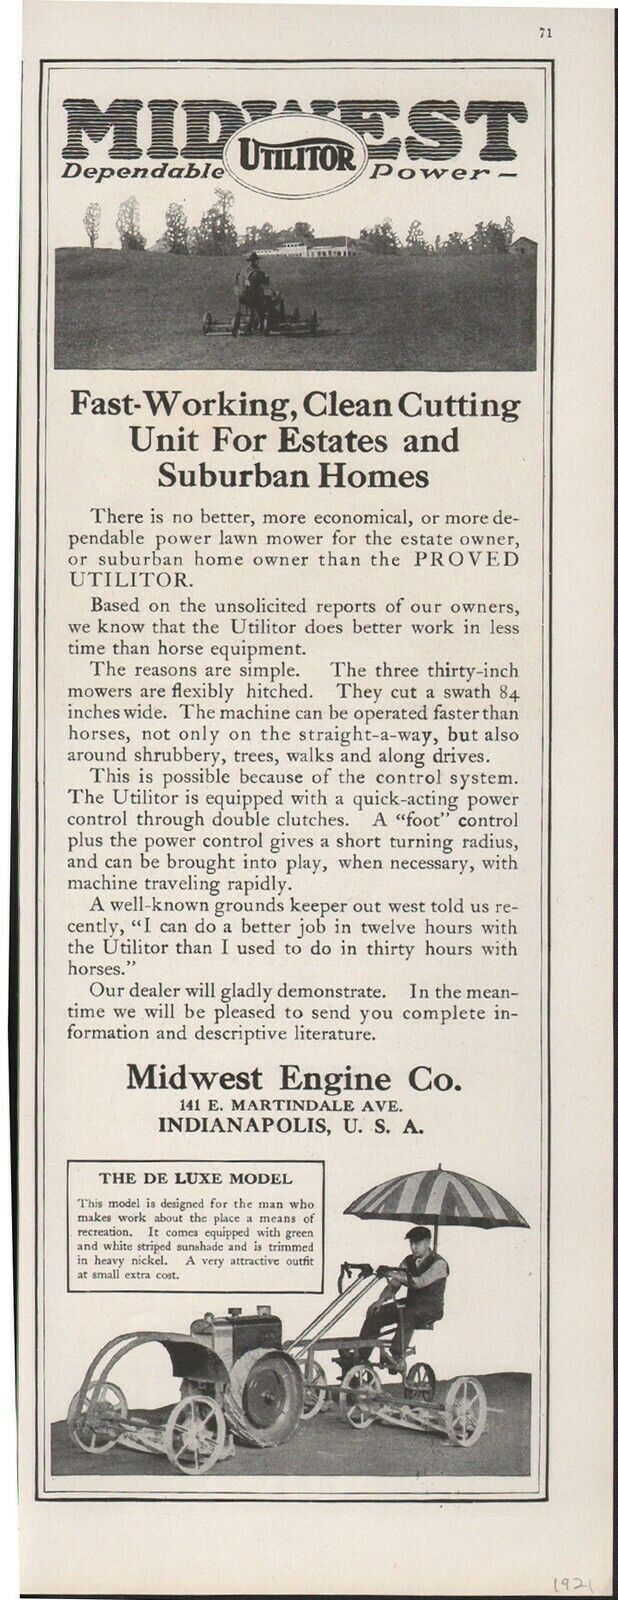 1921 MIDWEST UTILITOR POWER LAWN MOWER ESTATE HOME MACHINE MOTOR AD20207